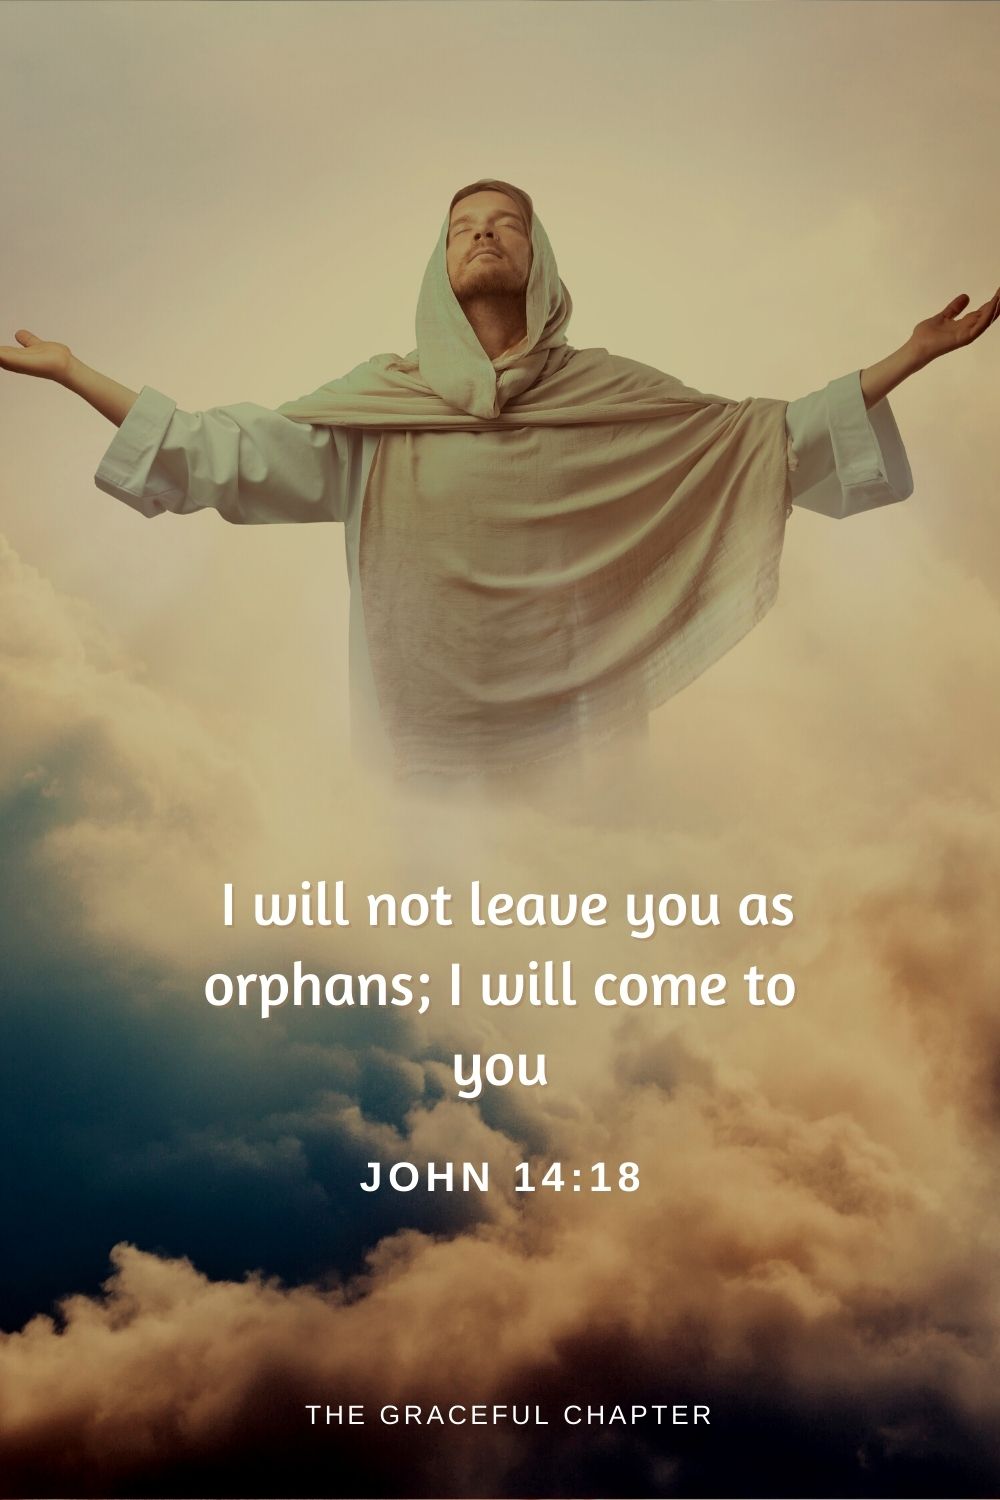  I will not leave you as orphans; I will come to you